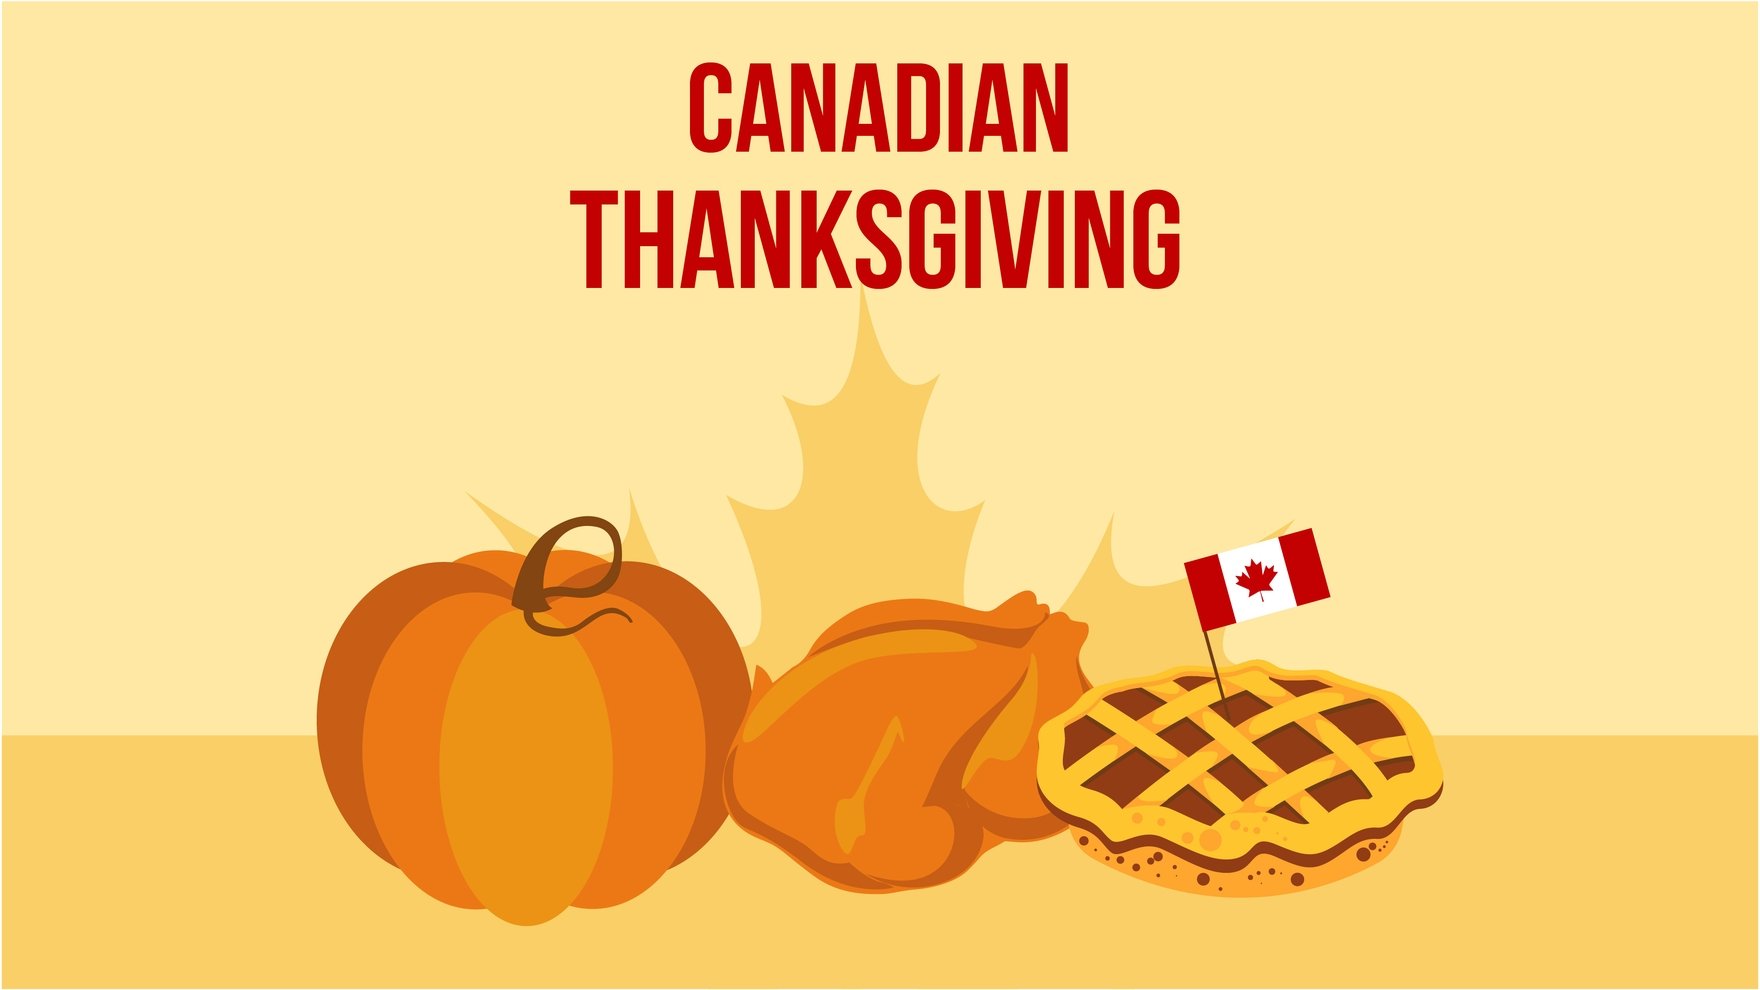 Free Canadian Thanksgiving Day Background in PDF, Illustrator, PSD, EPS, SVG, JPG, PNG